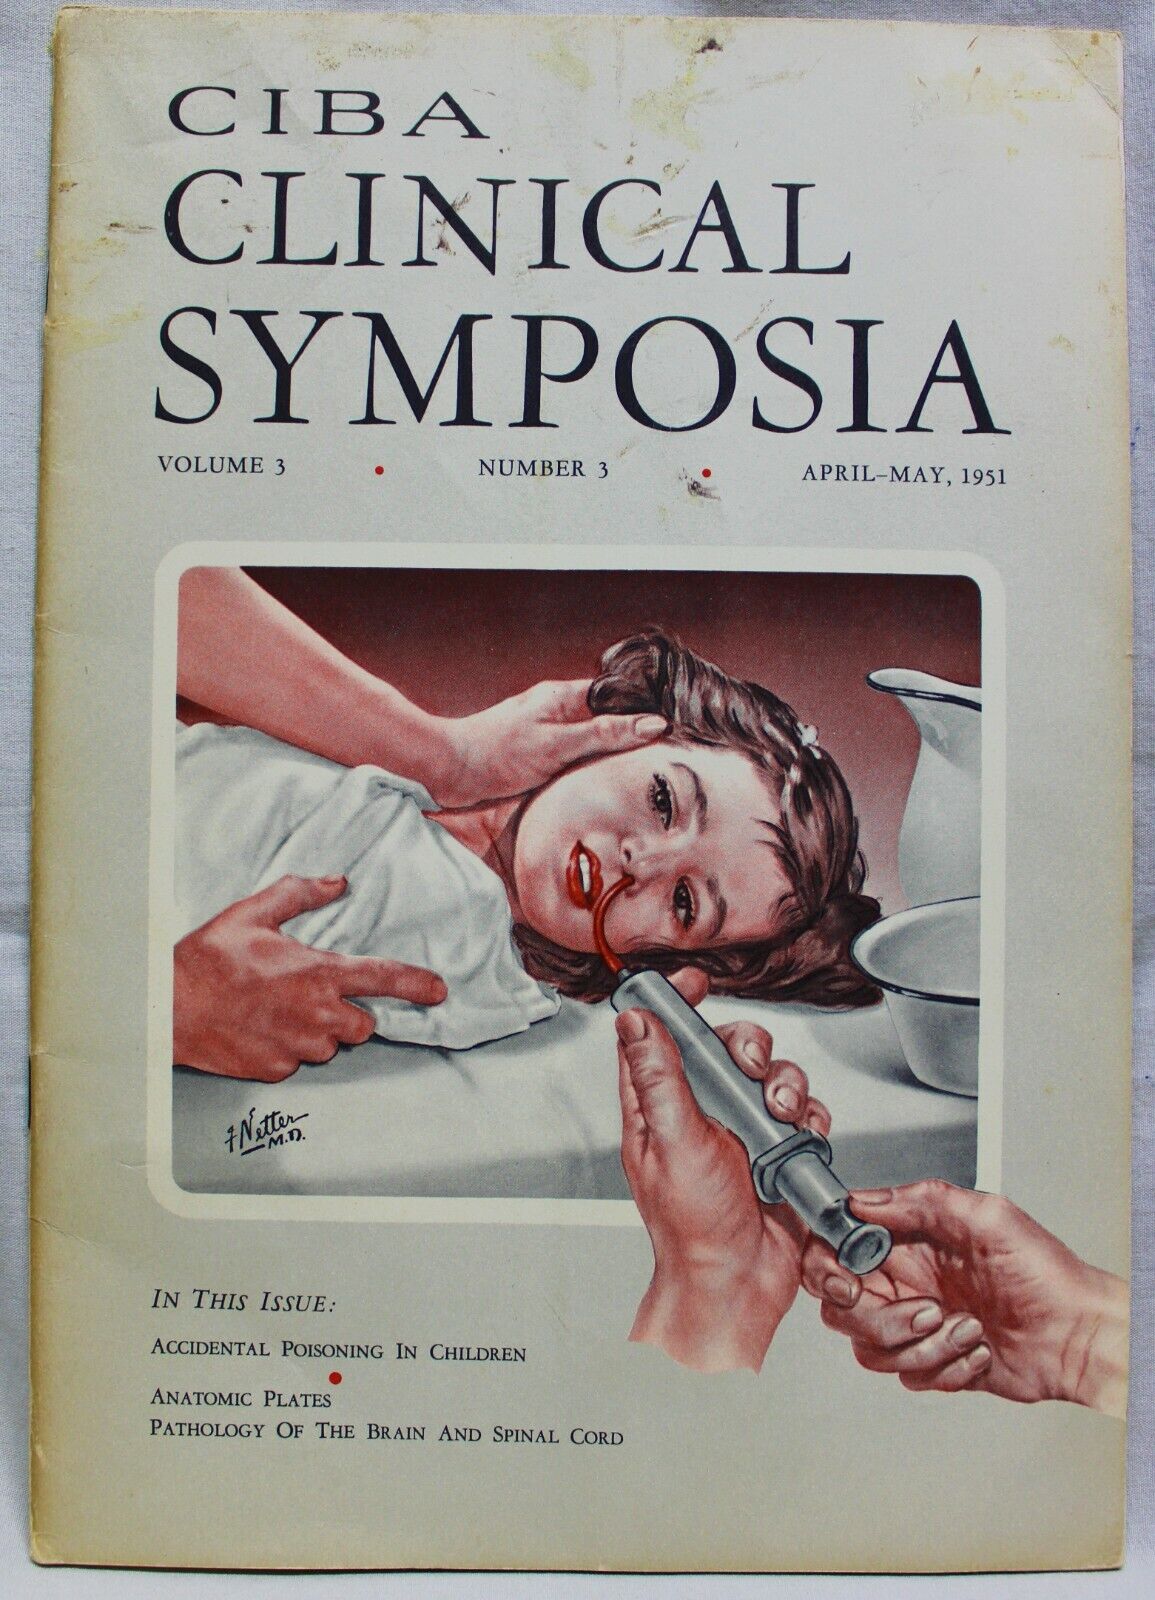 CIBA CLINICAL SYMPOSIA MEDICAL NEWS PUBLICATION APRIL 1955  CHILD POISONING 